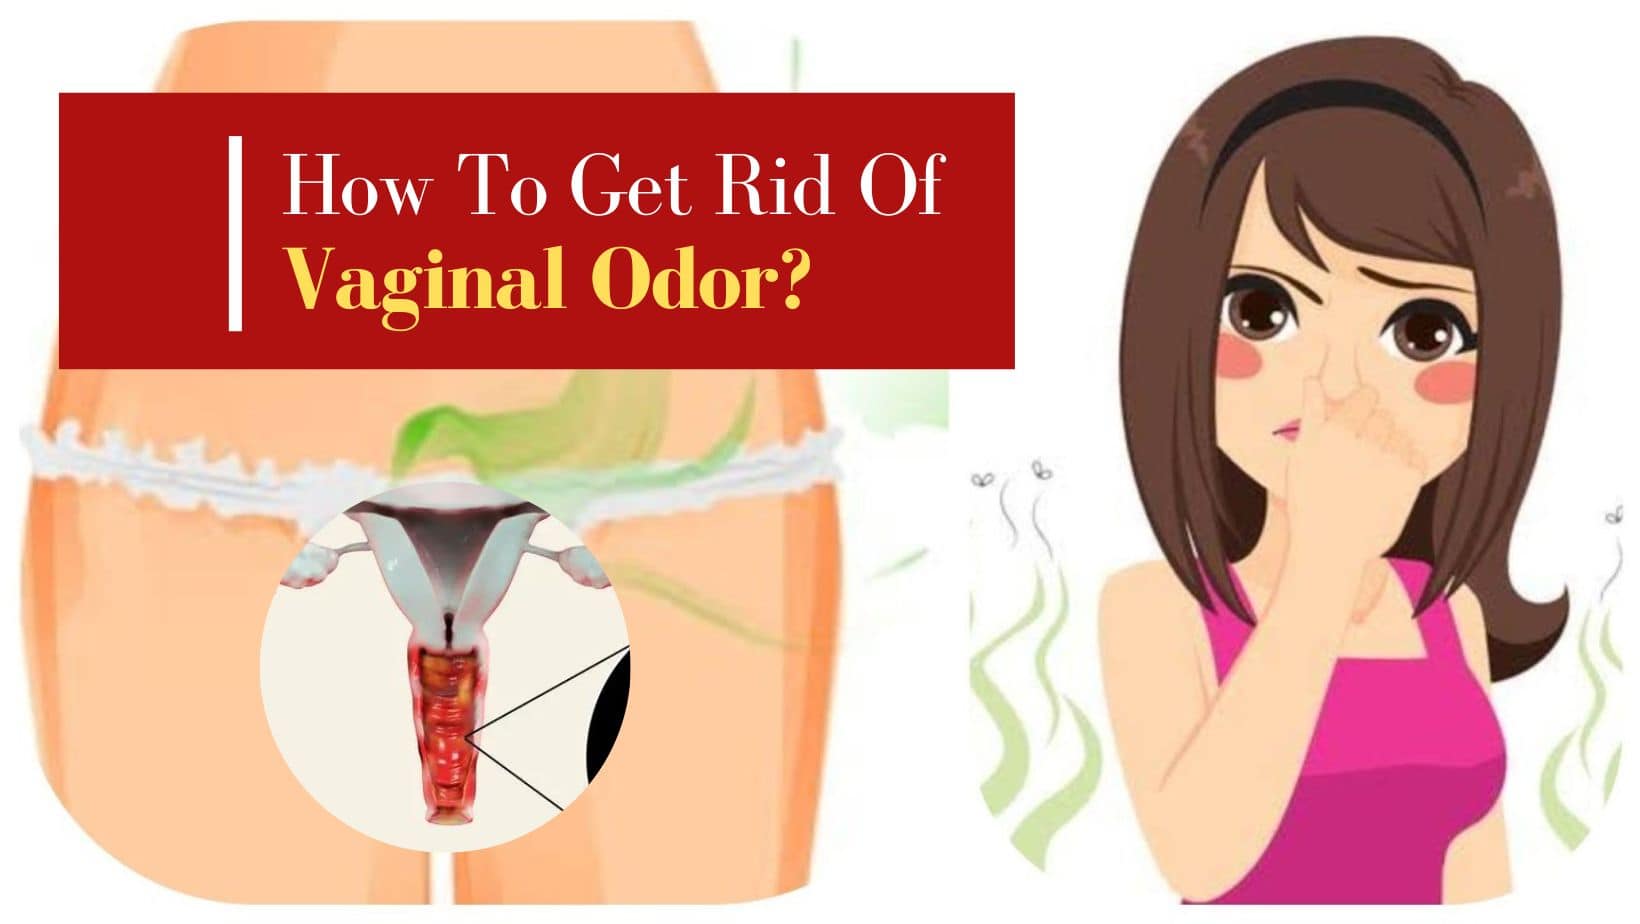 Unpleasant Smell From Vagina: How to Get Rid of Vaginal Odor